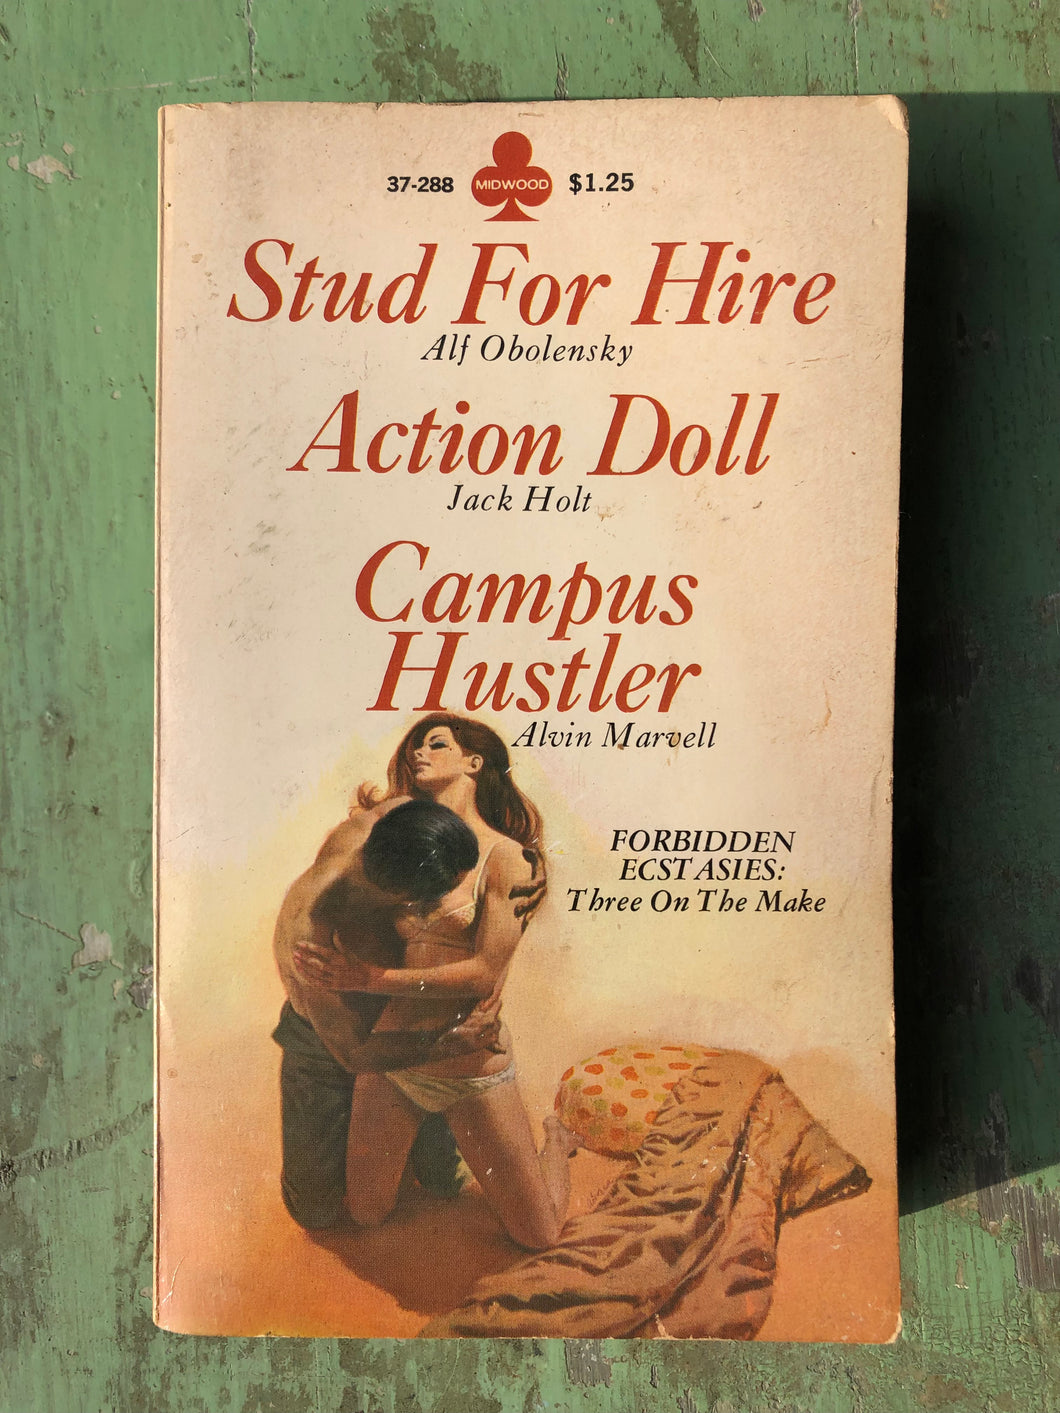 Forbidden Ecstasies: Three On The Make: Stud for Hire by Alf Obolensky, Action Doll by Jack Holt, Campus Hustler by Alvin Marvell